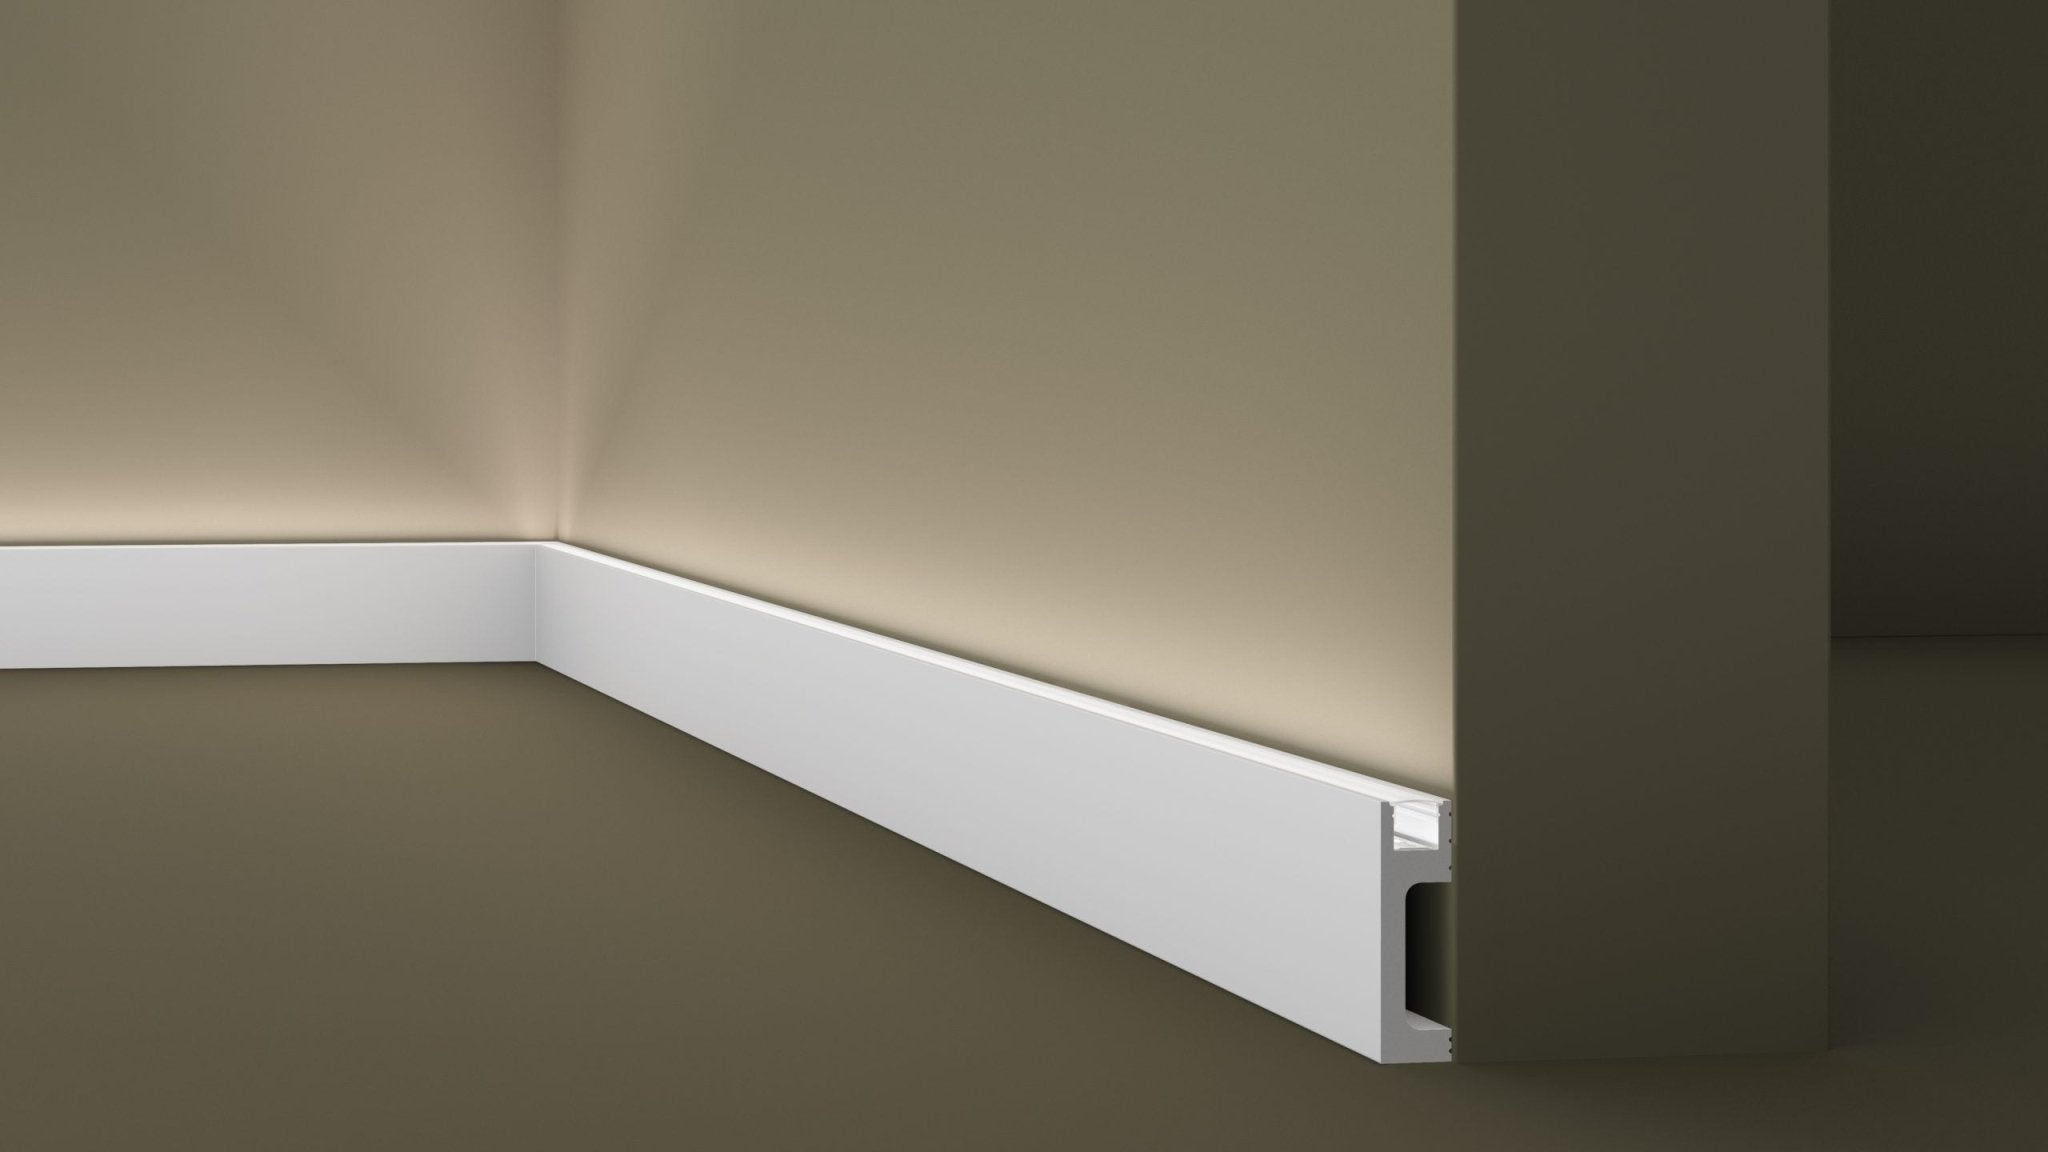 IL10 2M WALLSTYL SKIRTING BOARD WITH LED LIGHT DIFFUSER - Covings | DecorMania